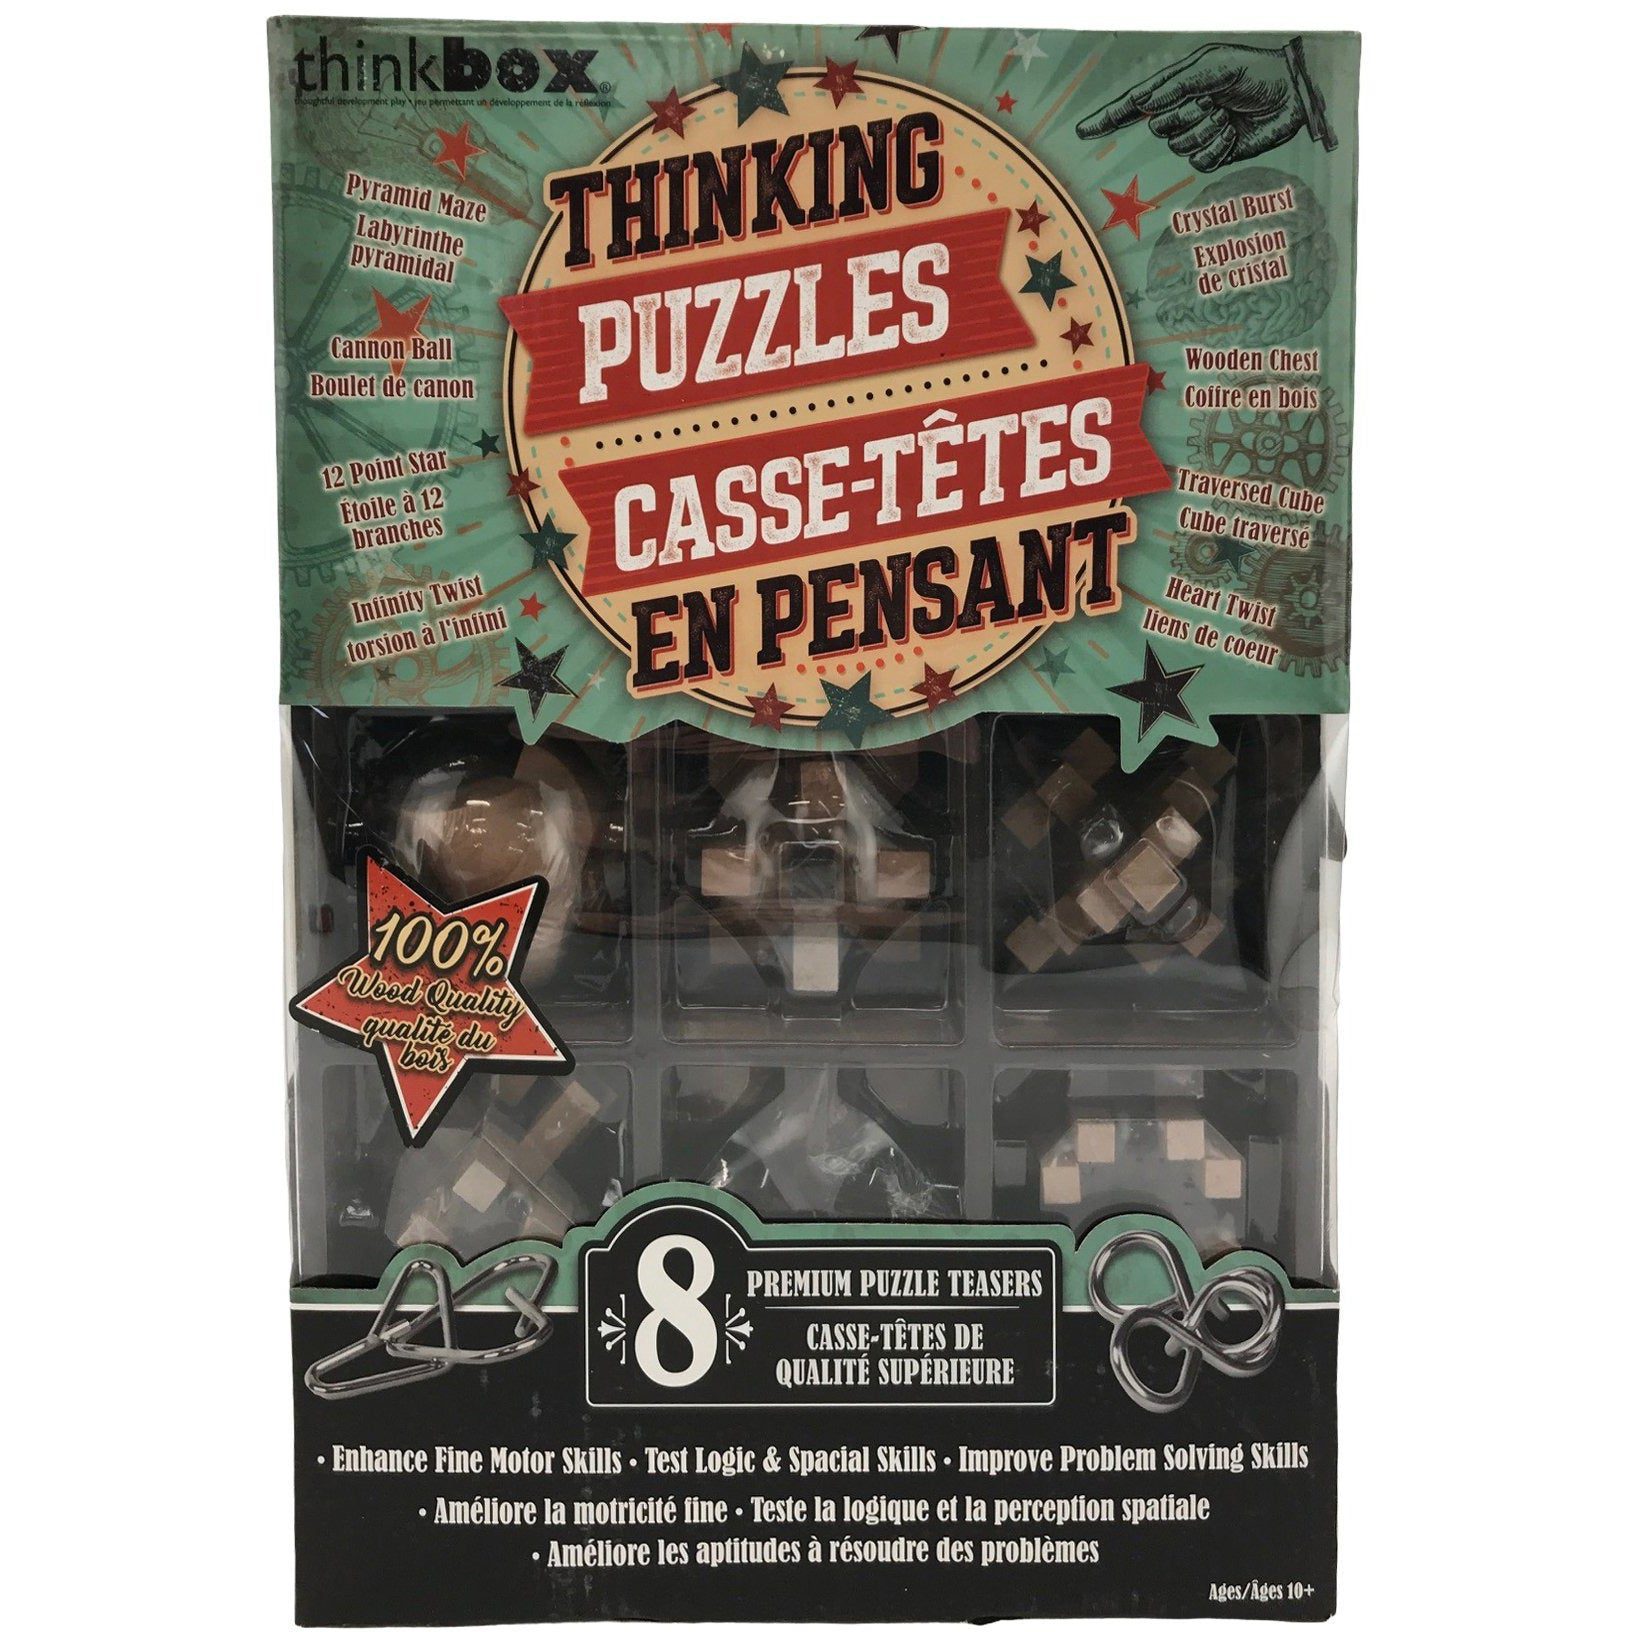 Thinkbox Thinking Puzzles 8 premium brain teaseing puzzles made of 100% Wood